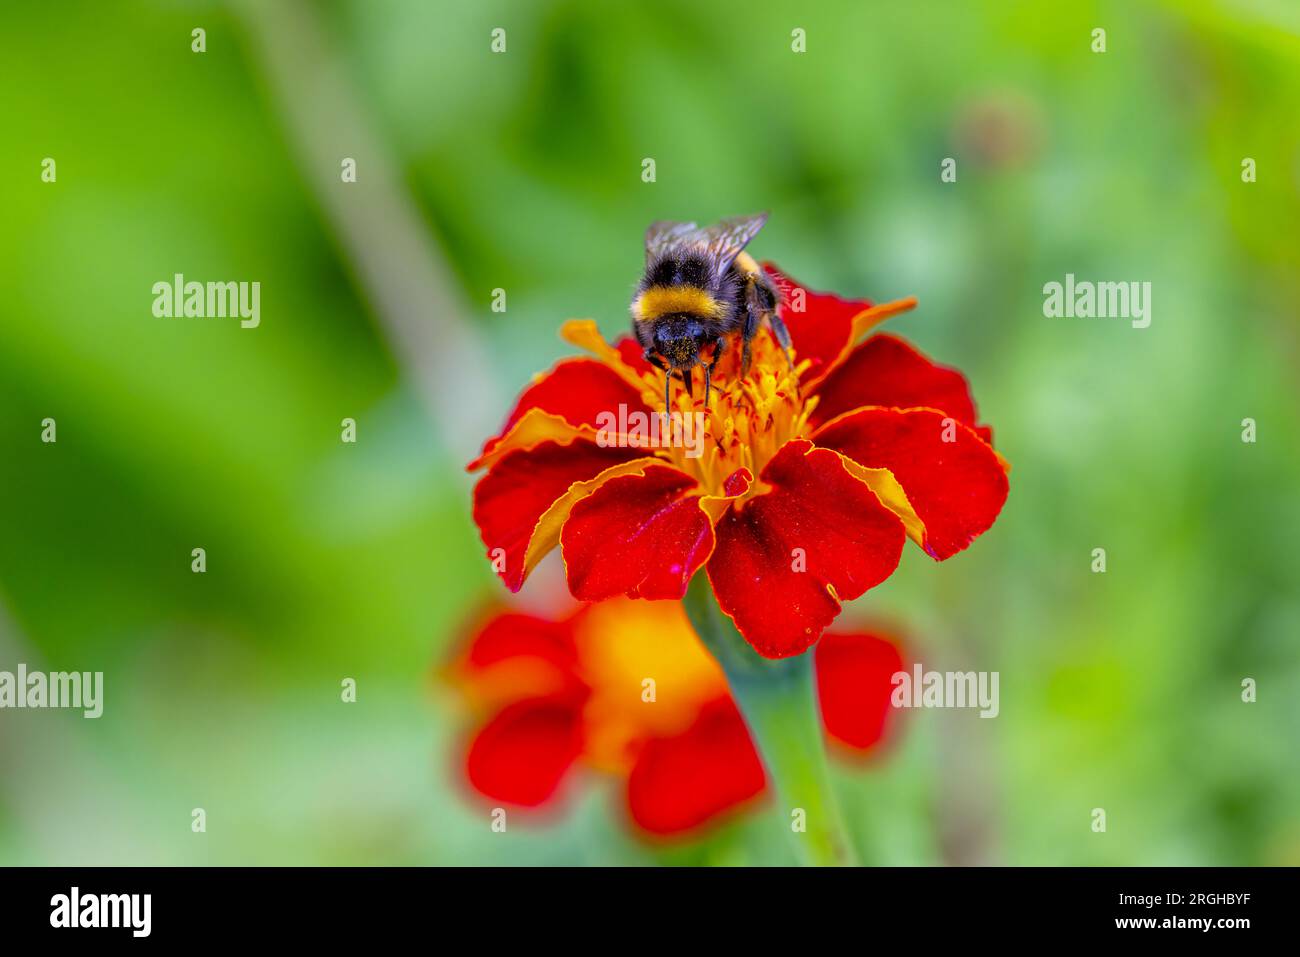 Bumblebee feeds on nectar from red Marigold flower during summer pollination. Insect covered with yellow pollen grains. Wicklow, Ireland Stock Photo